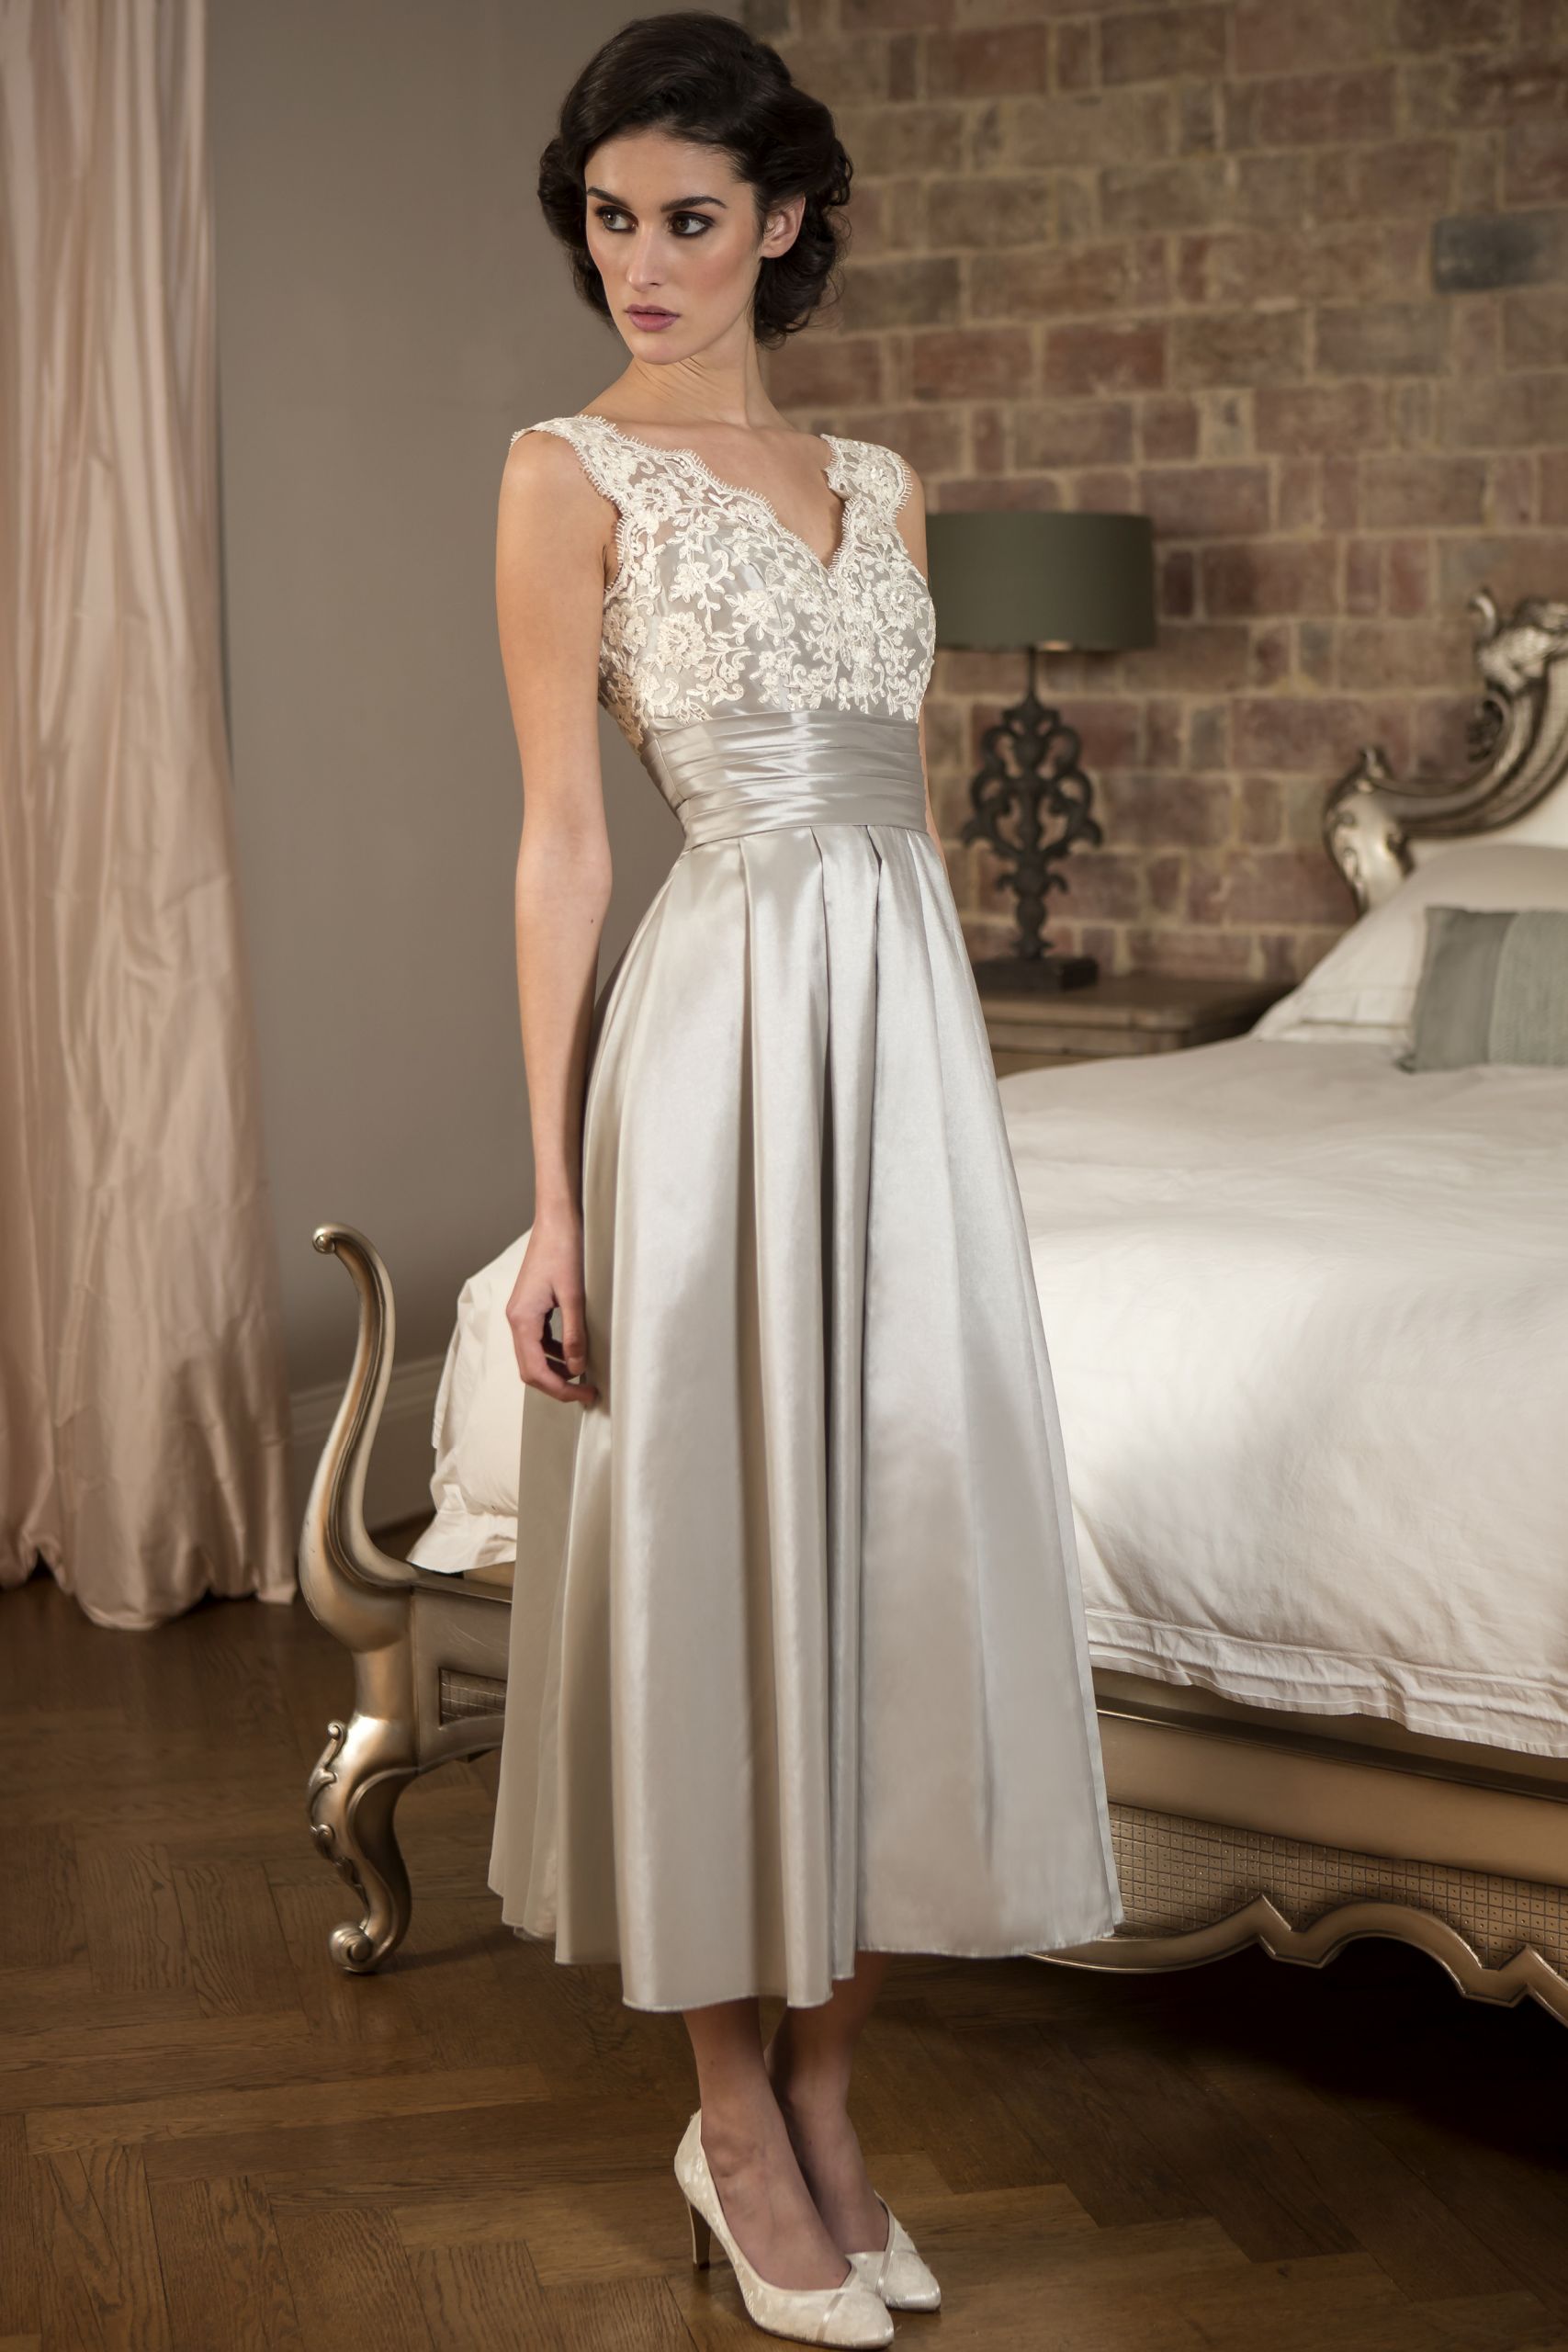 T Length Wedding Dresses
 Ombre T Length High Low Dress From Camille La Vie And